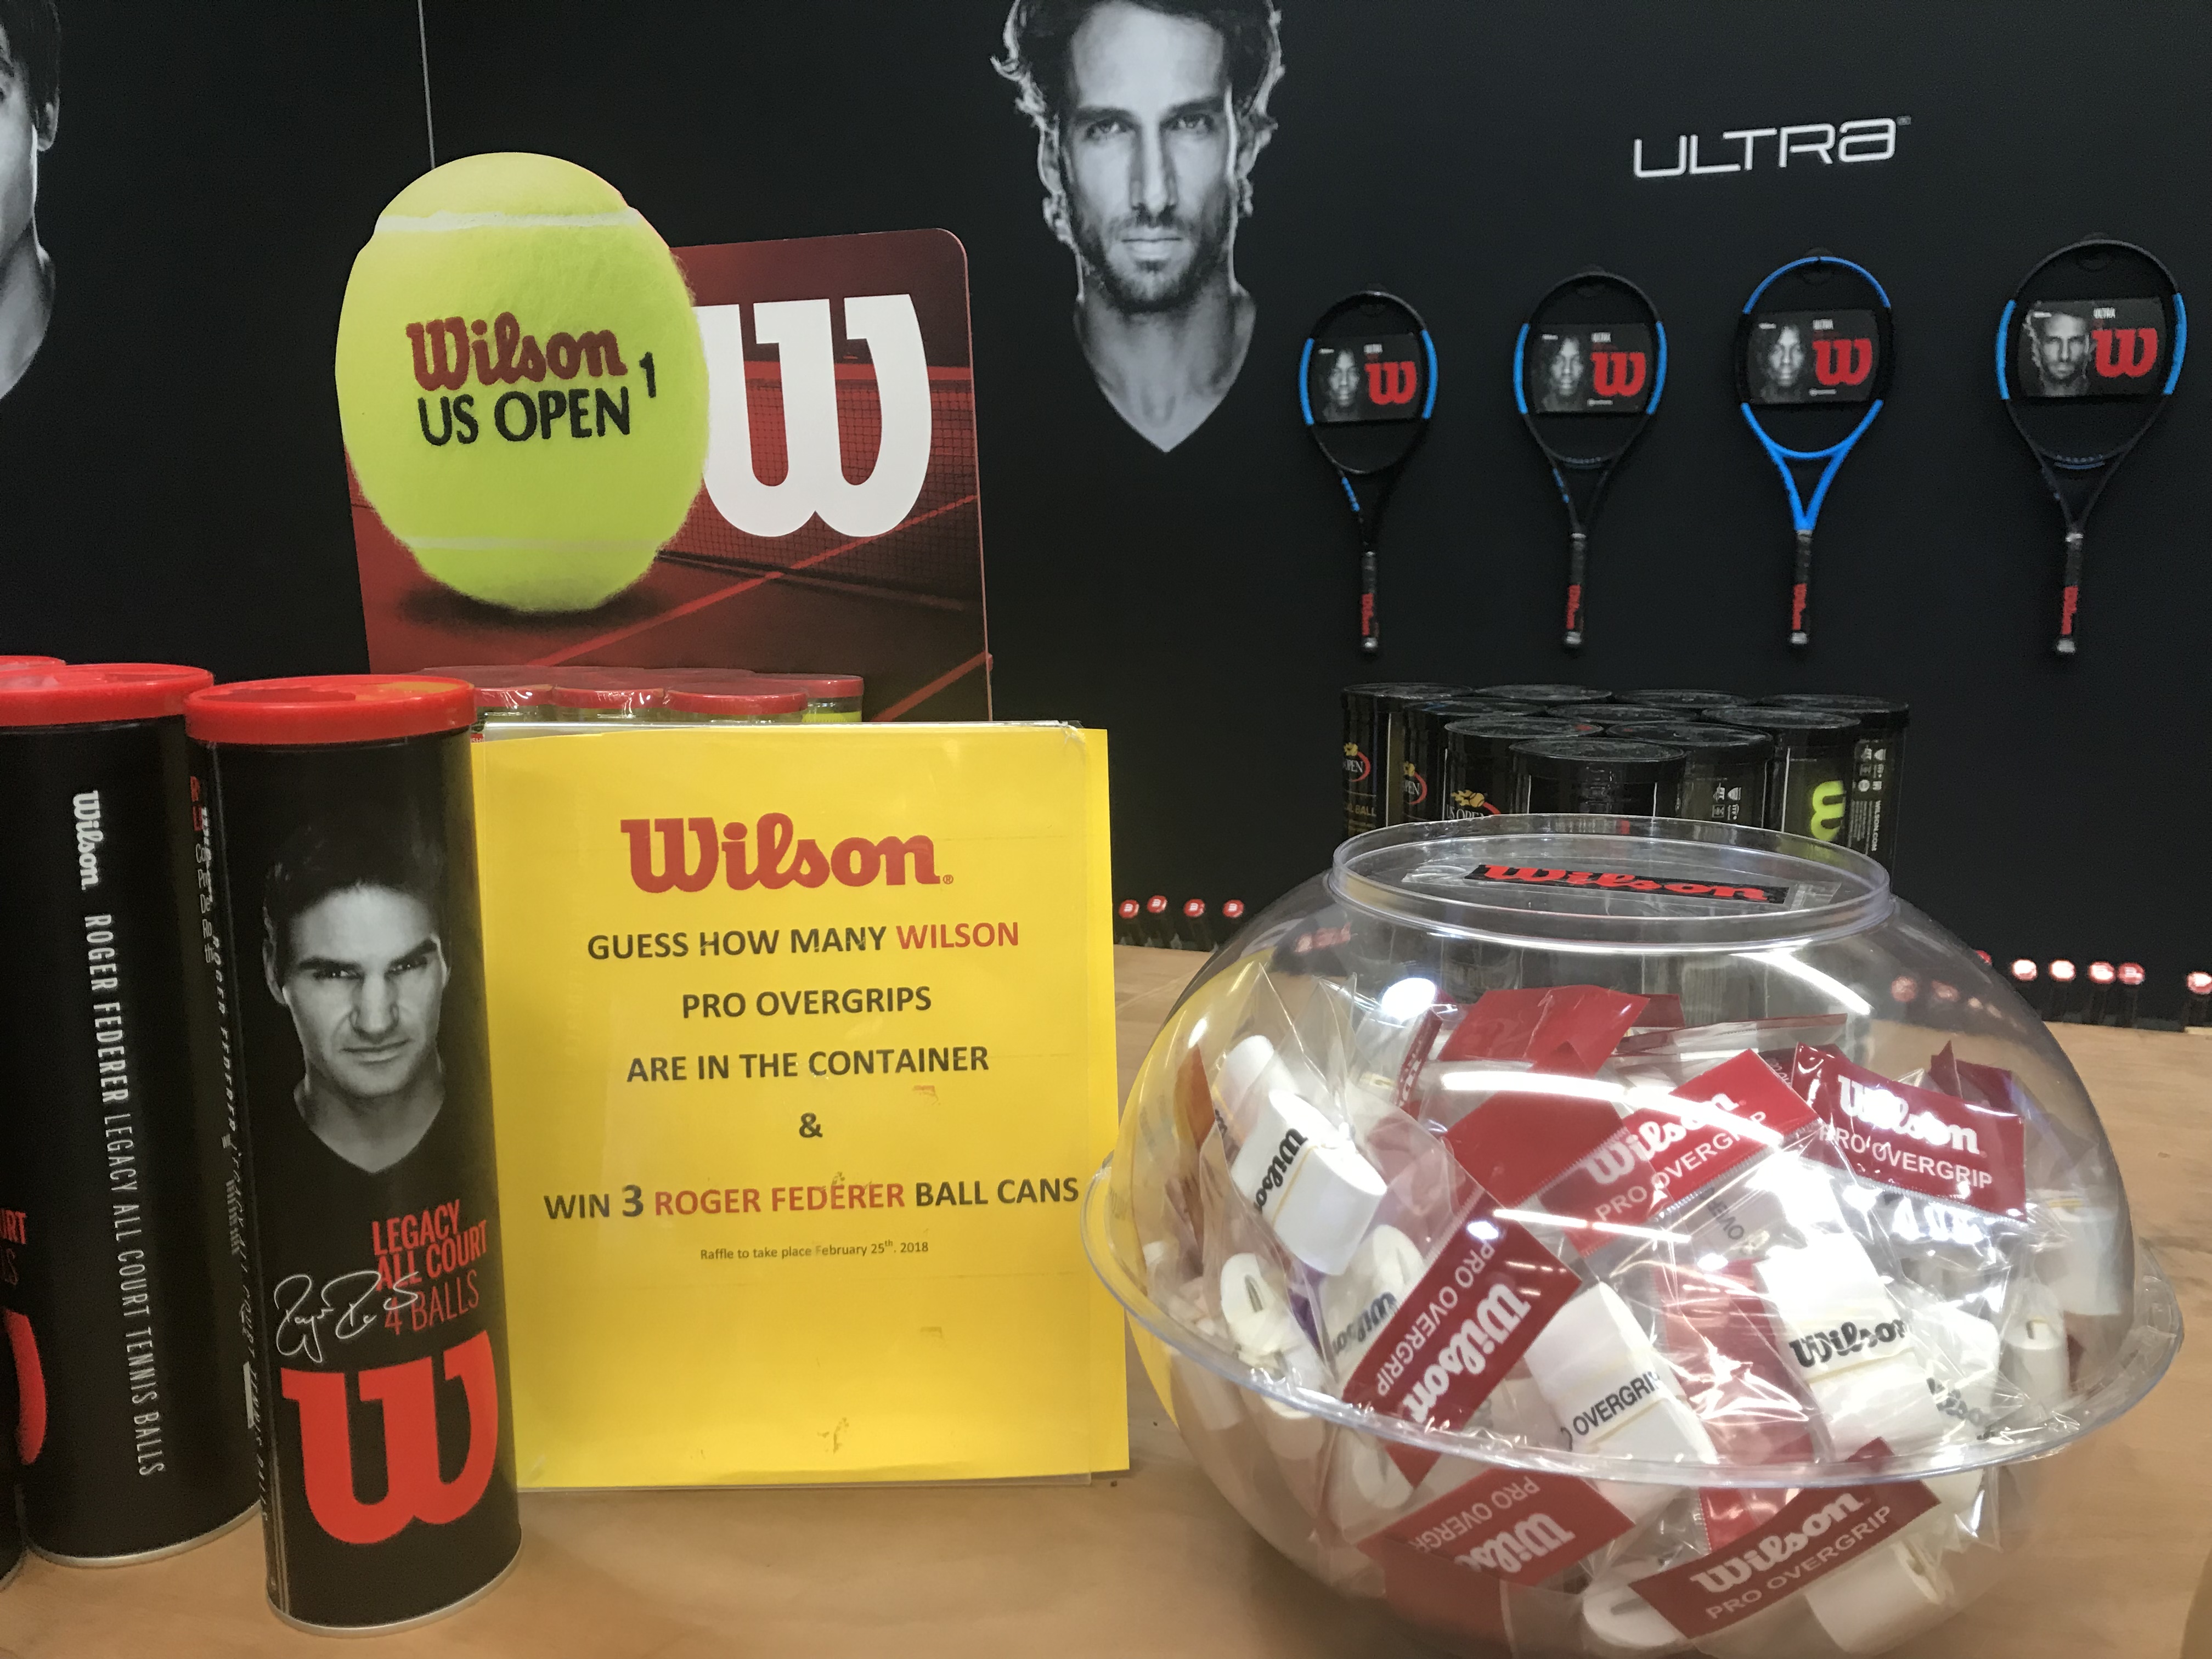 Exclusive Wilson Giveaway at Tennis Express